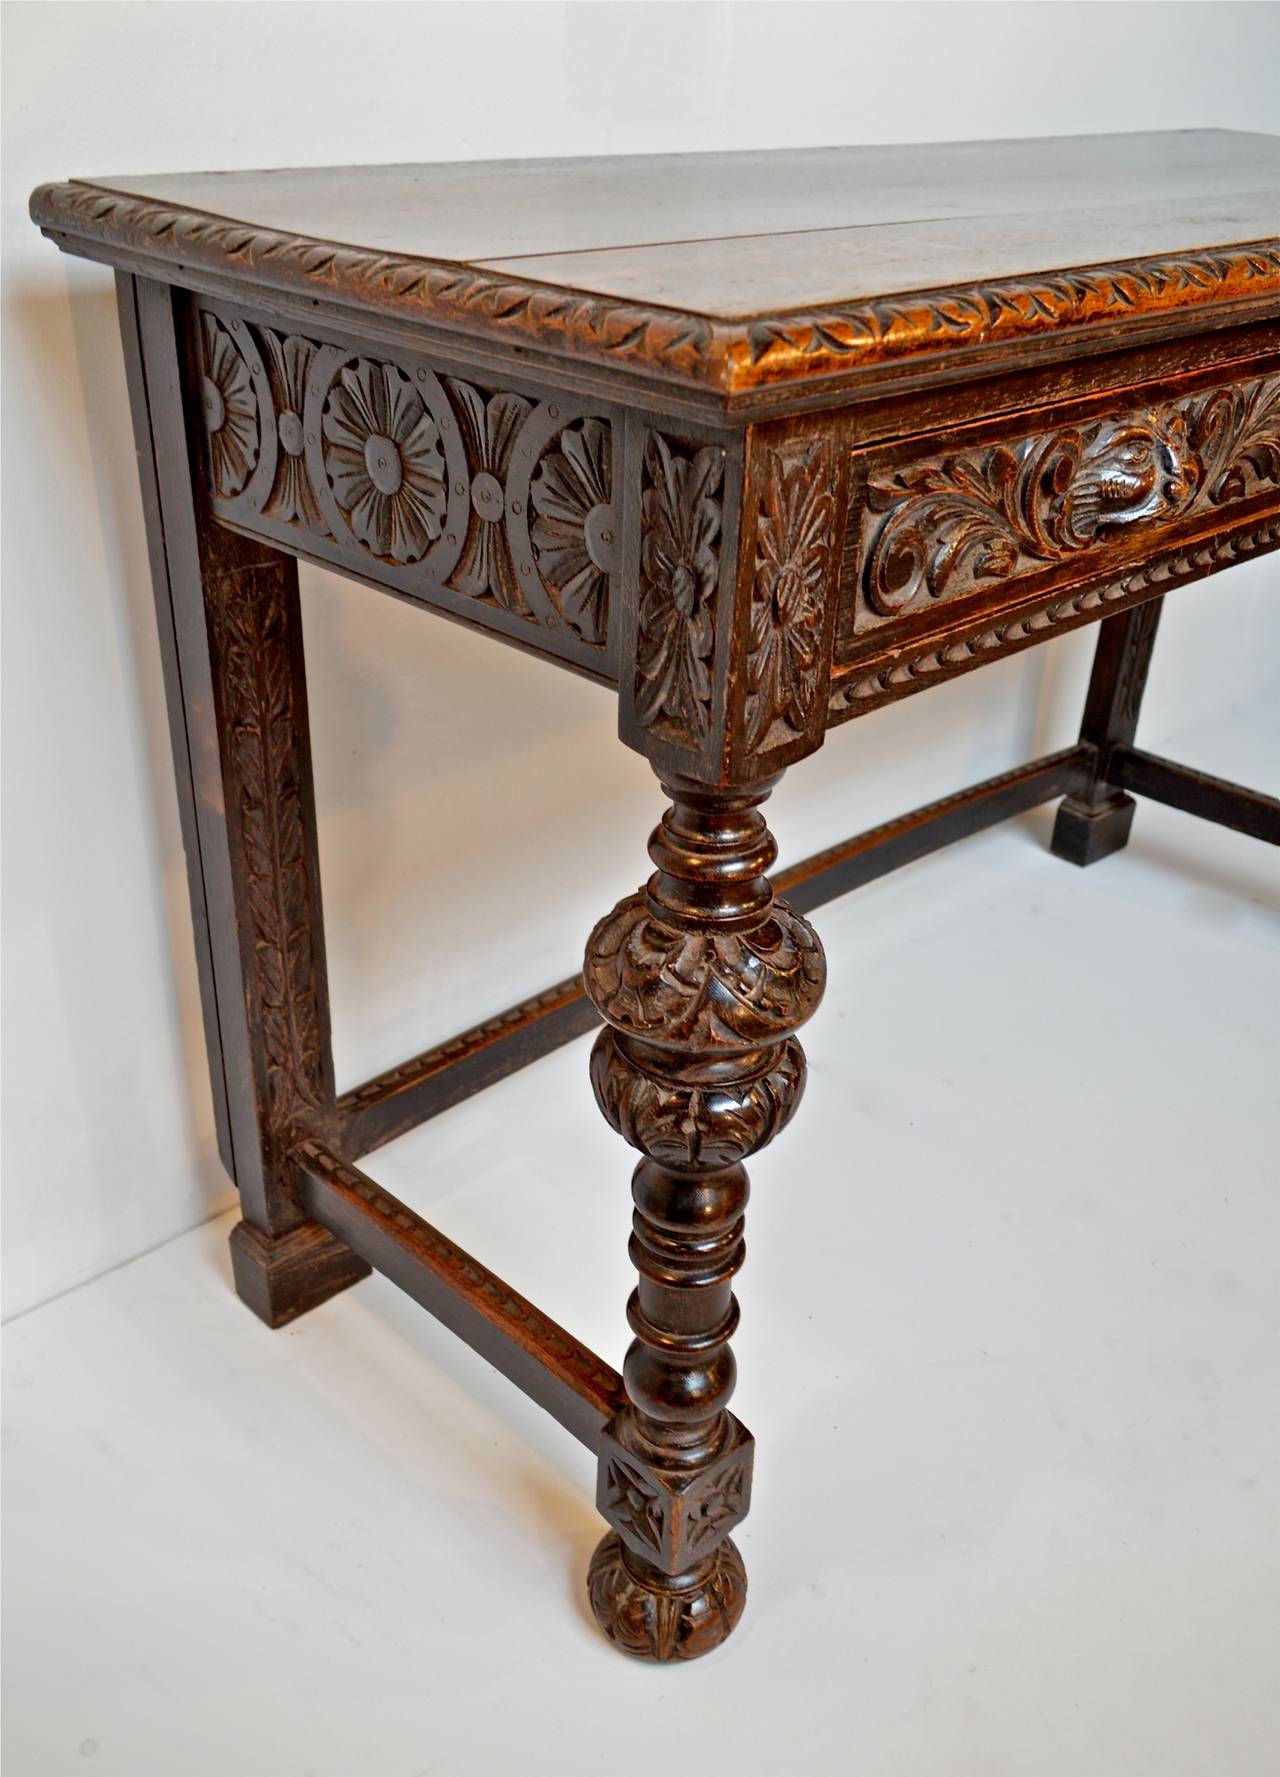 Renaissance Revival Console Table in Oak by James Shoolbred